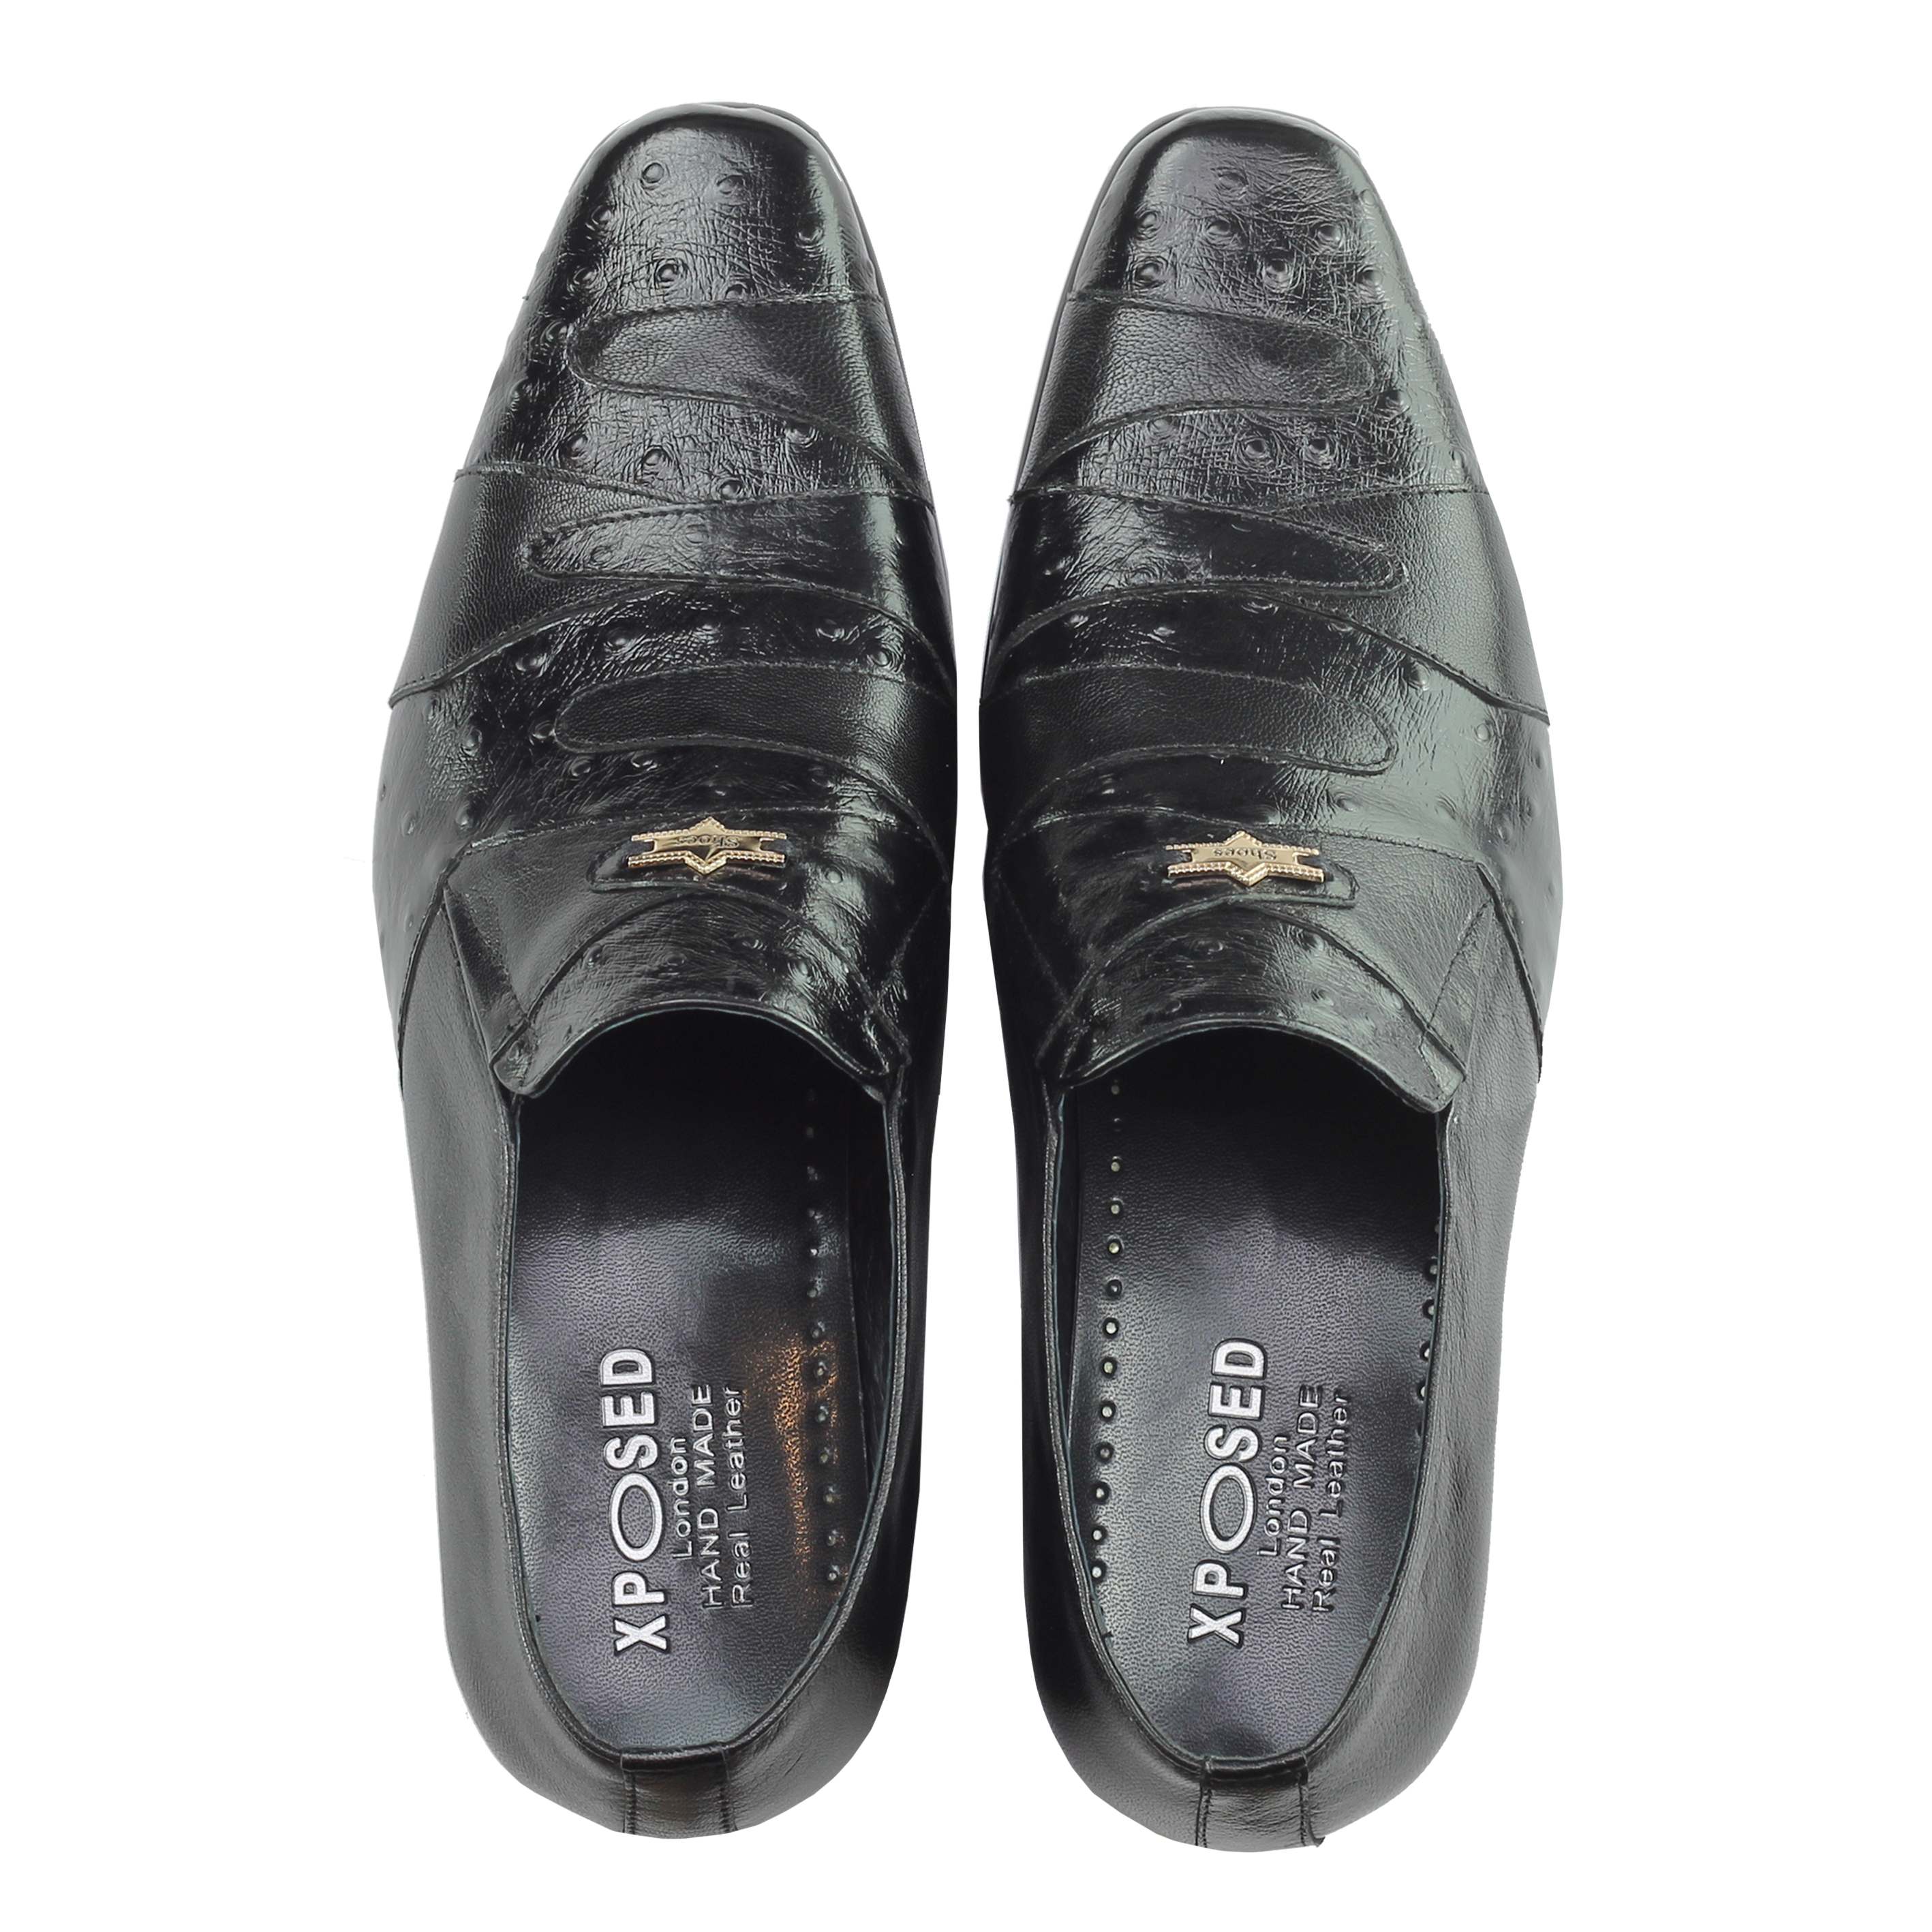 Black Real Leather Slip On Shoes